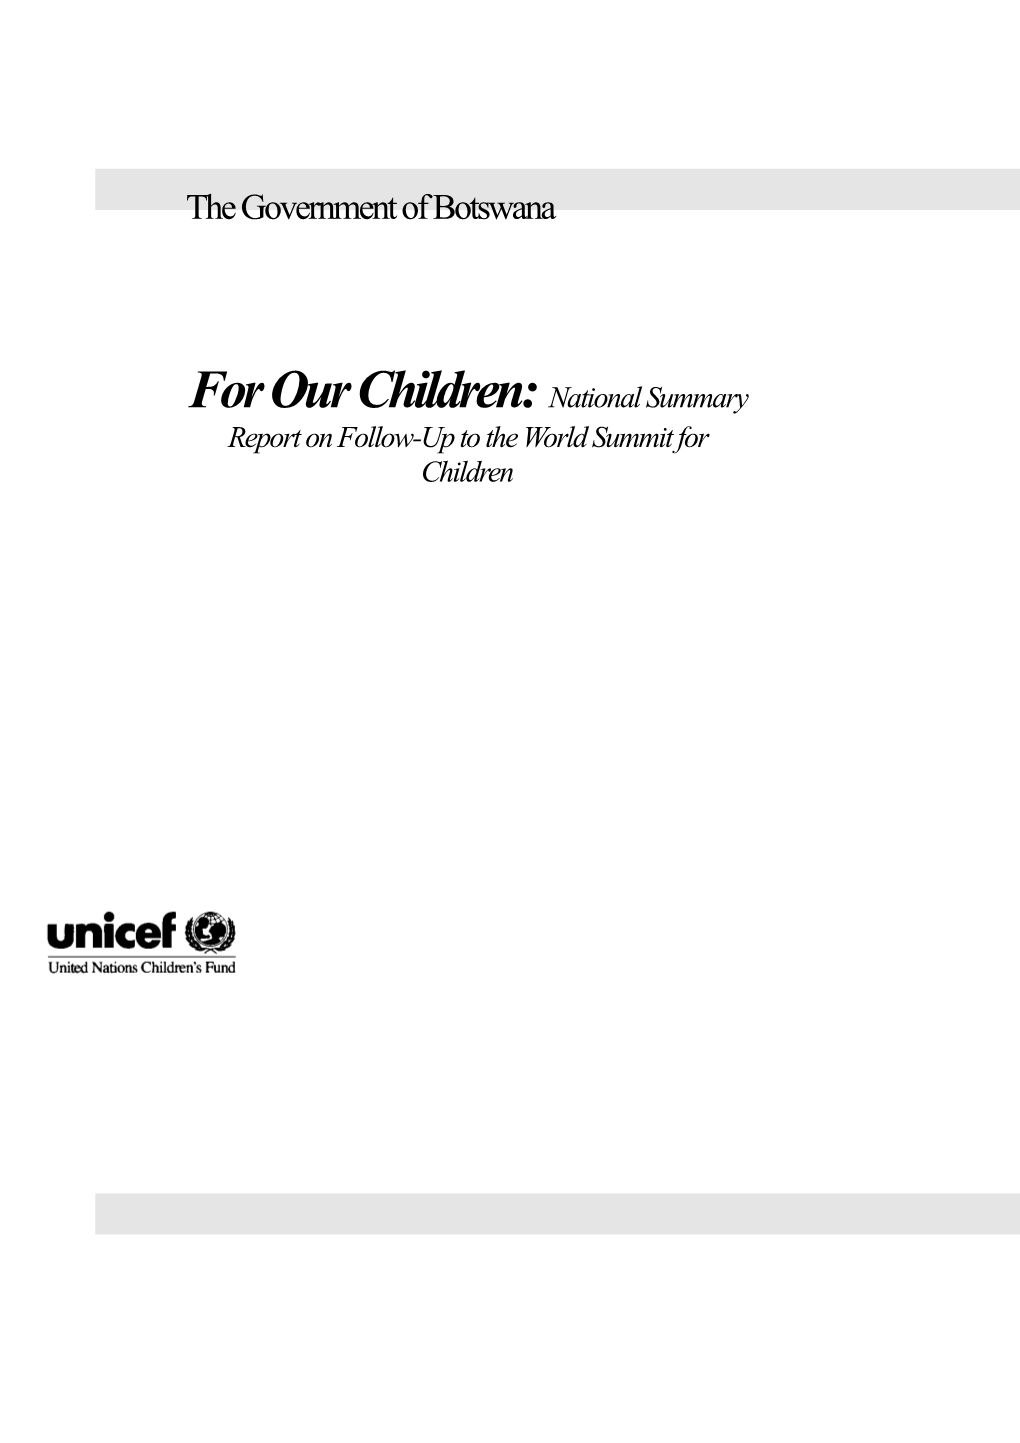 For Our Children: National Summary Report on Follow-Up to the World Summit for Children